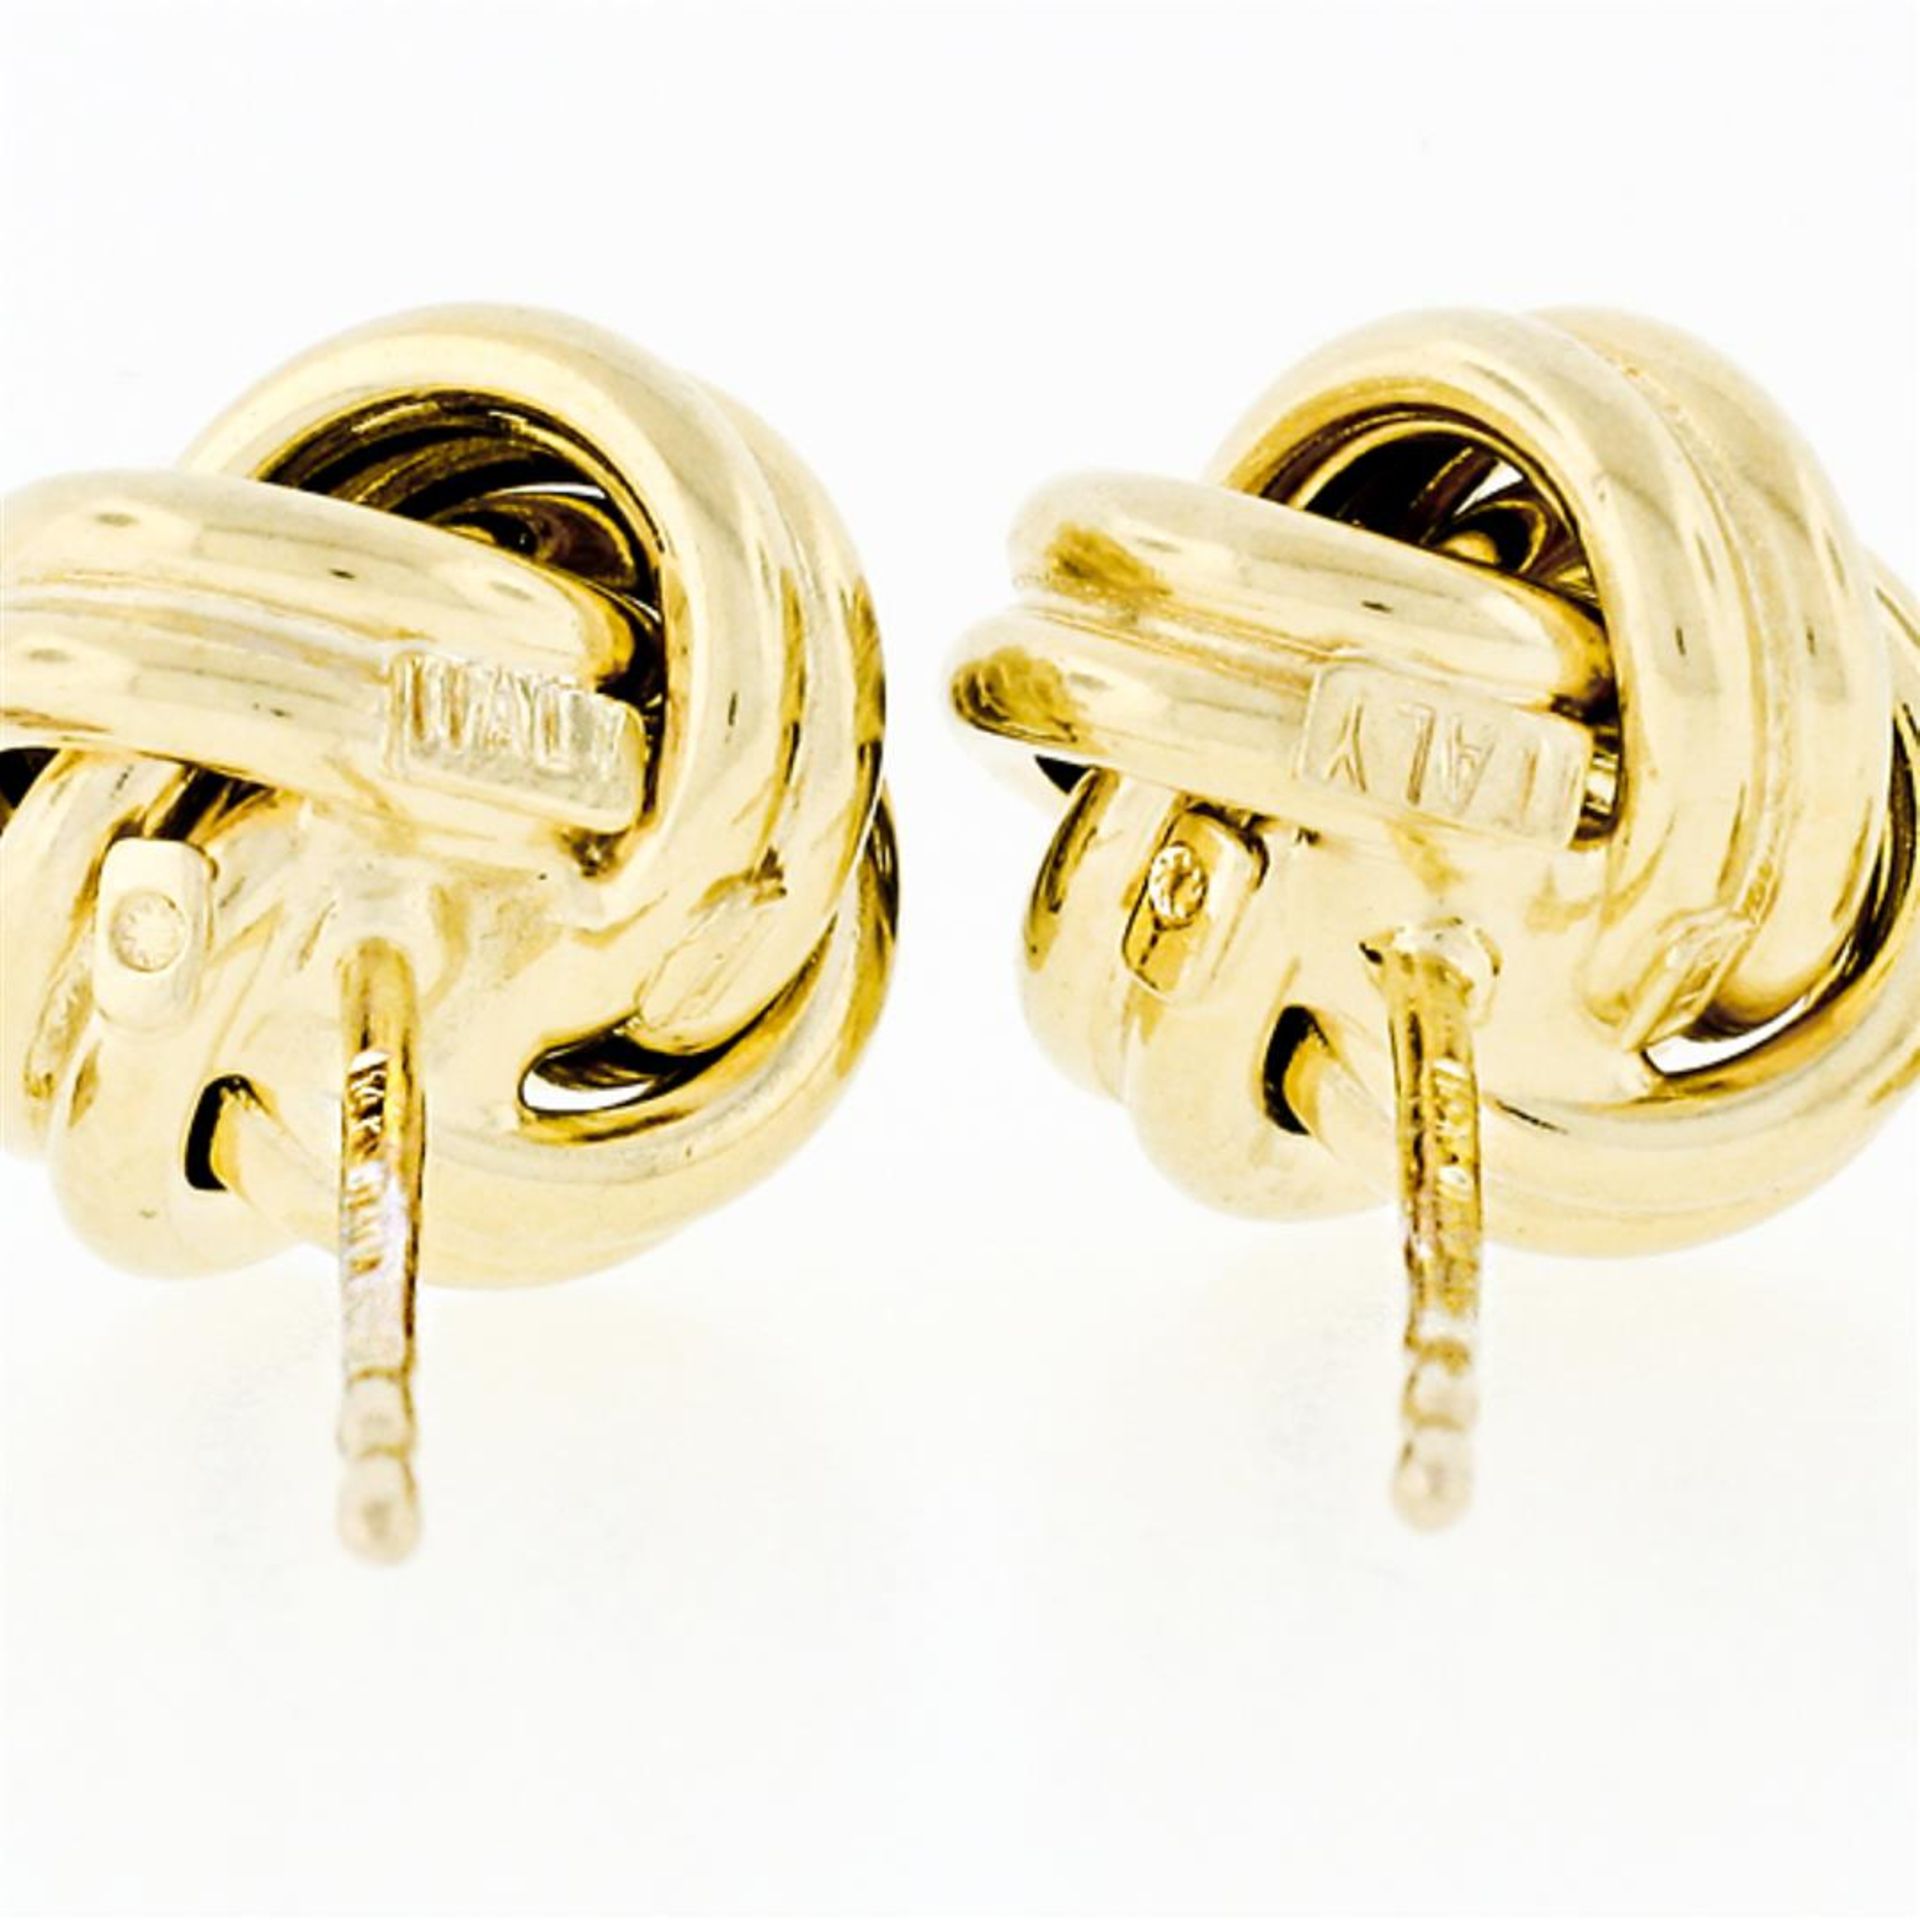 Italian 14K Yellow Gold Ribbed High Polished Dual Tube Love Knot Stud Earrings - Image 5 of 6